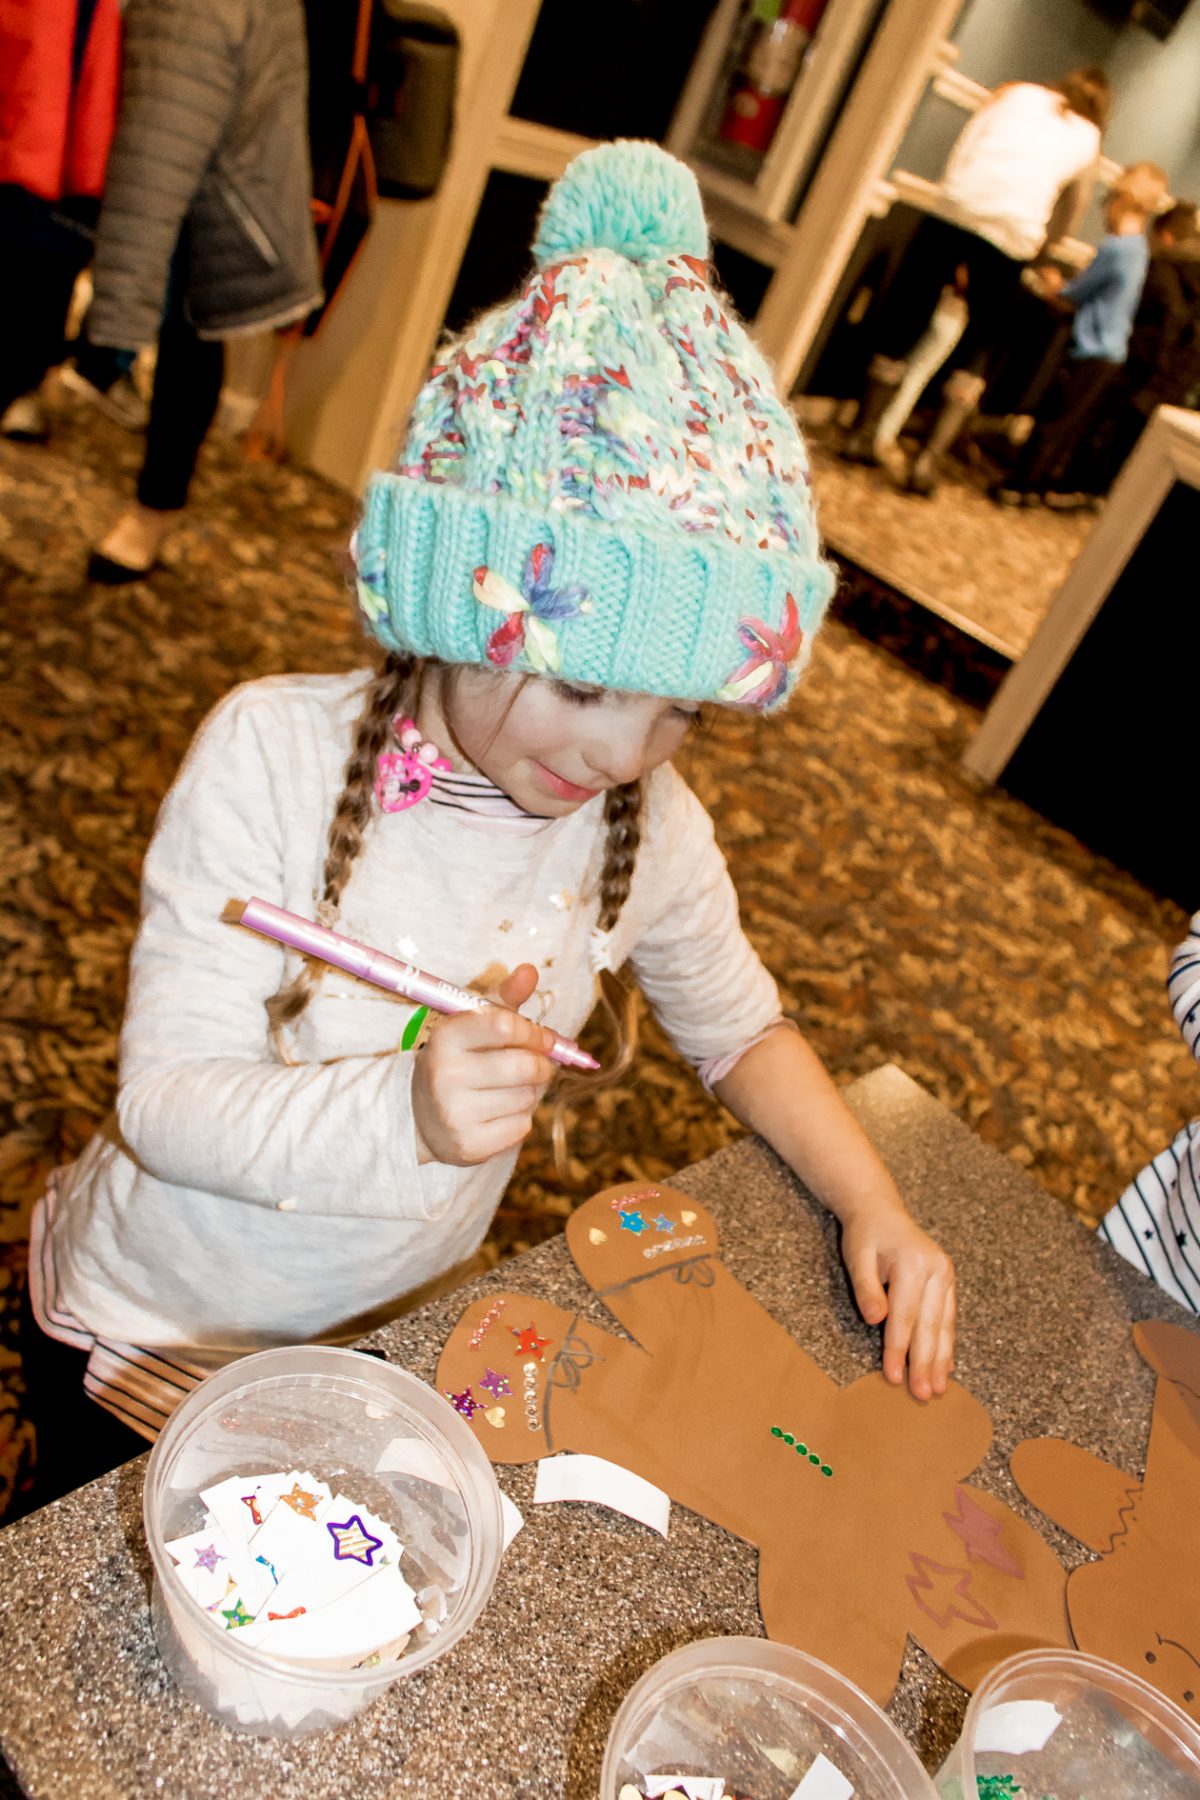 Little girl wearing tan sweater and blue winter hat smiling while making a gingerbread art projects at Woodloch Pines Resort Winter Festival